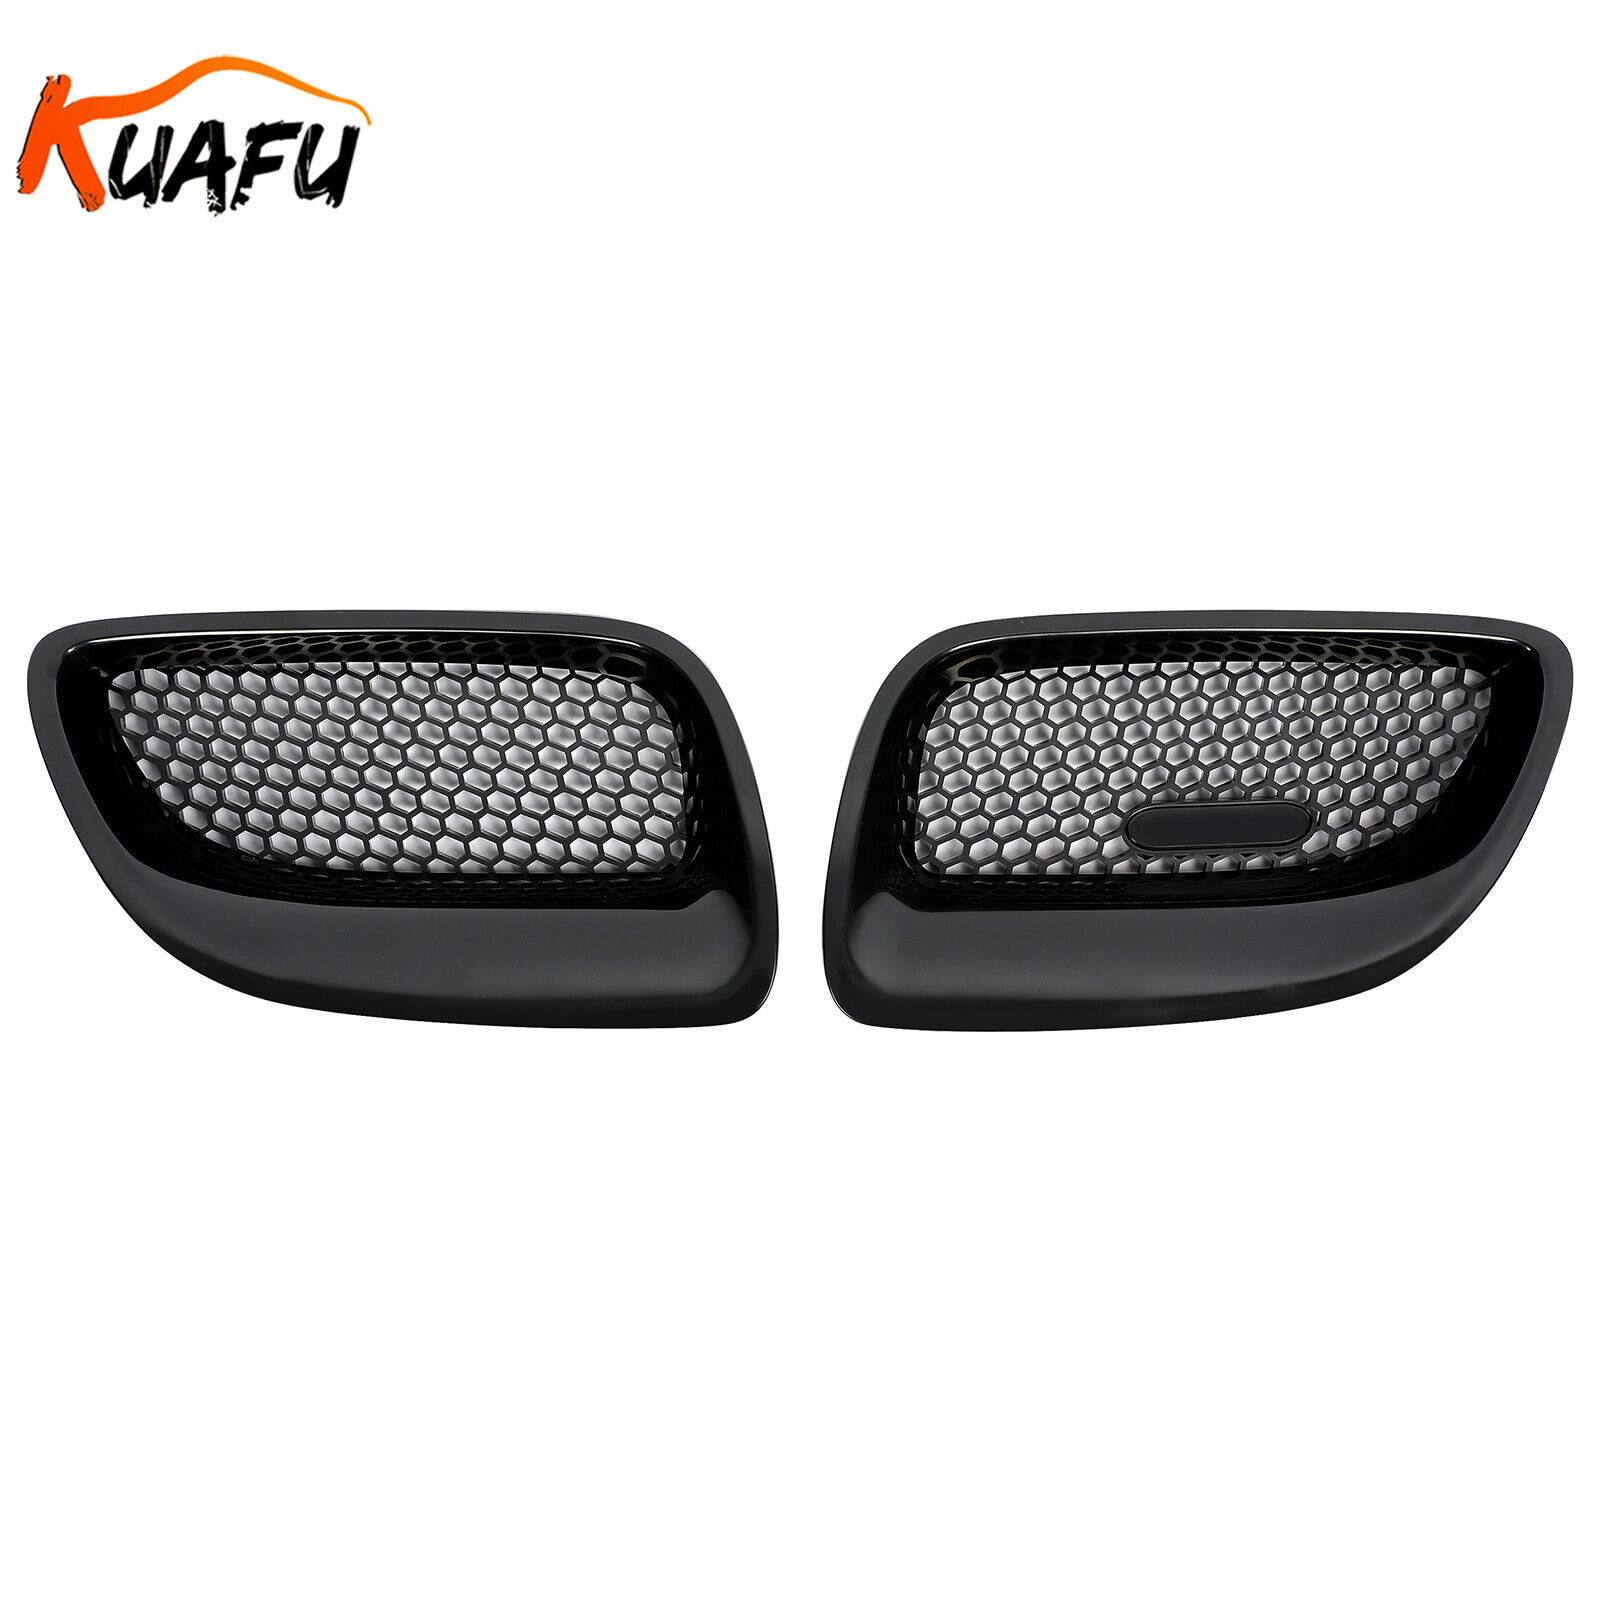 KUAFU Pair Front Kidney Grill Grille Insert ABS For Pontiac GTO 2004 2005 2006